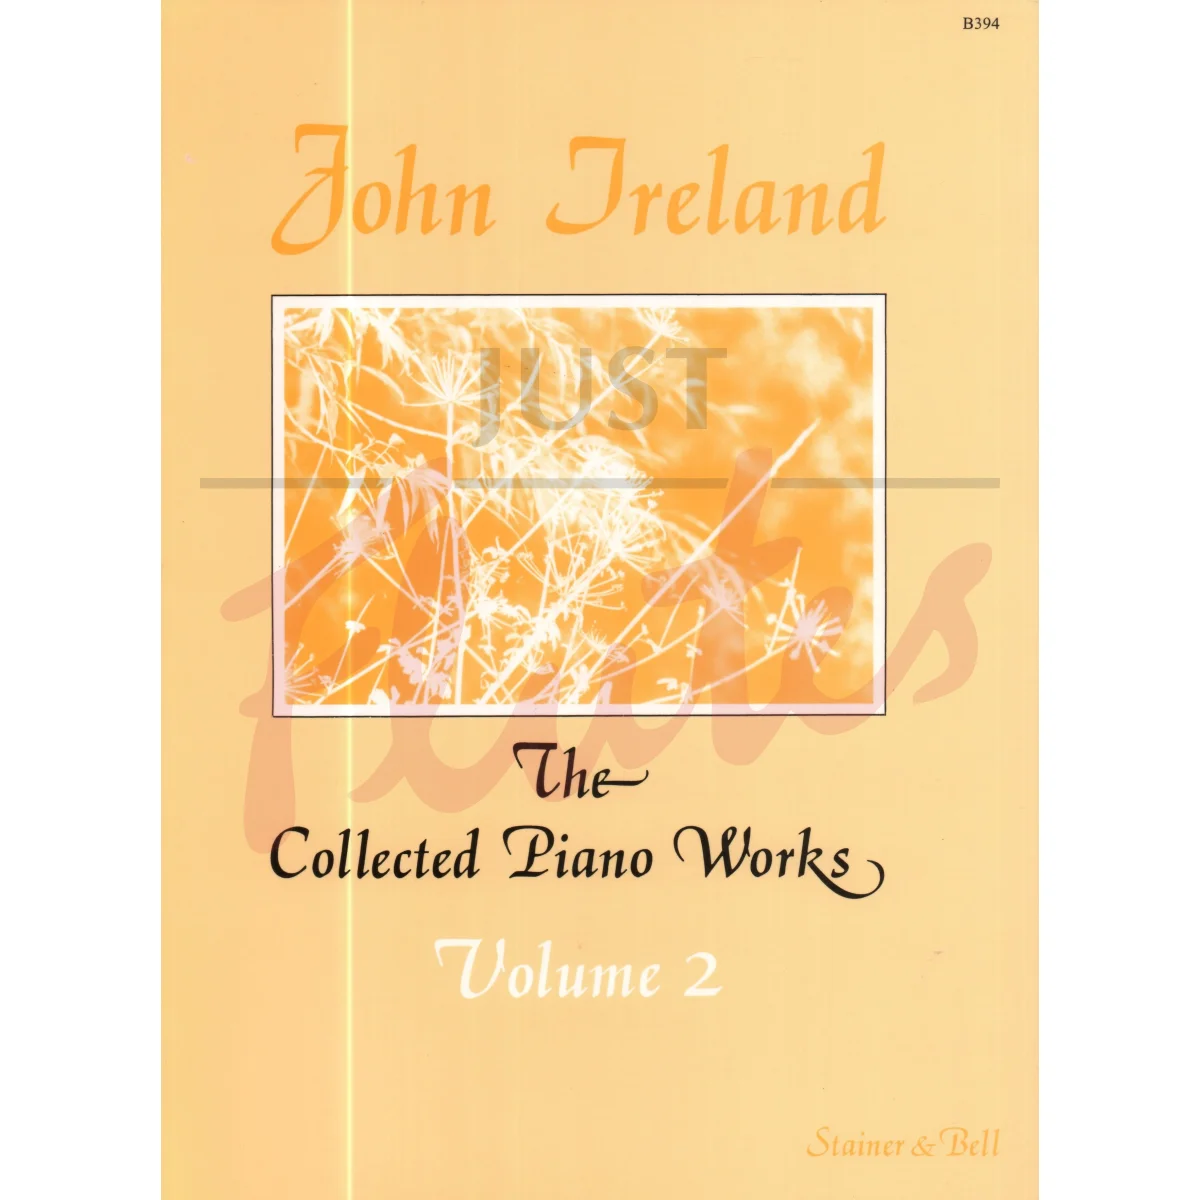 The Collected Piano Works Volume 2